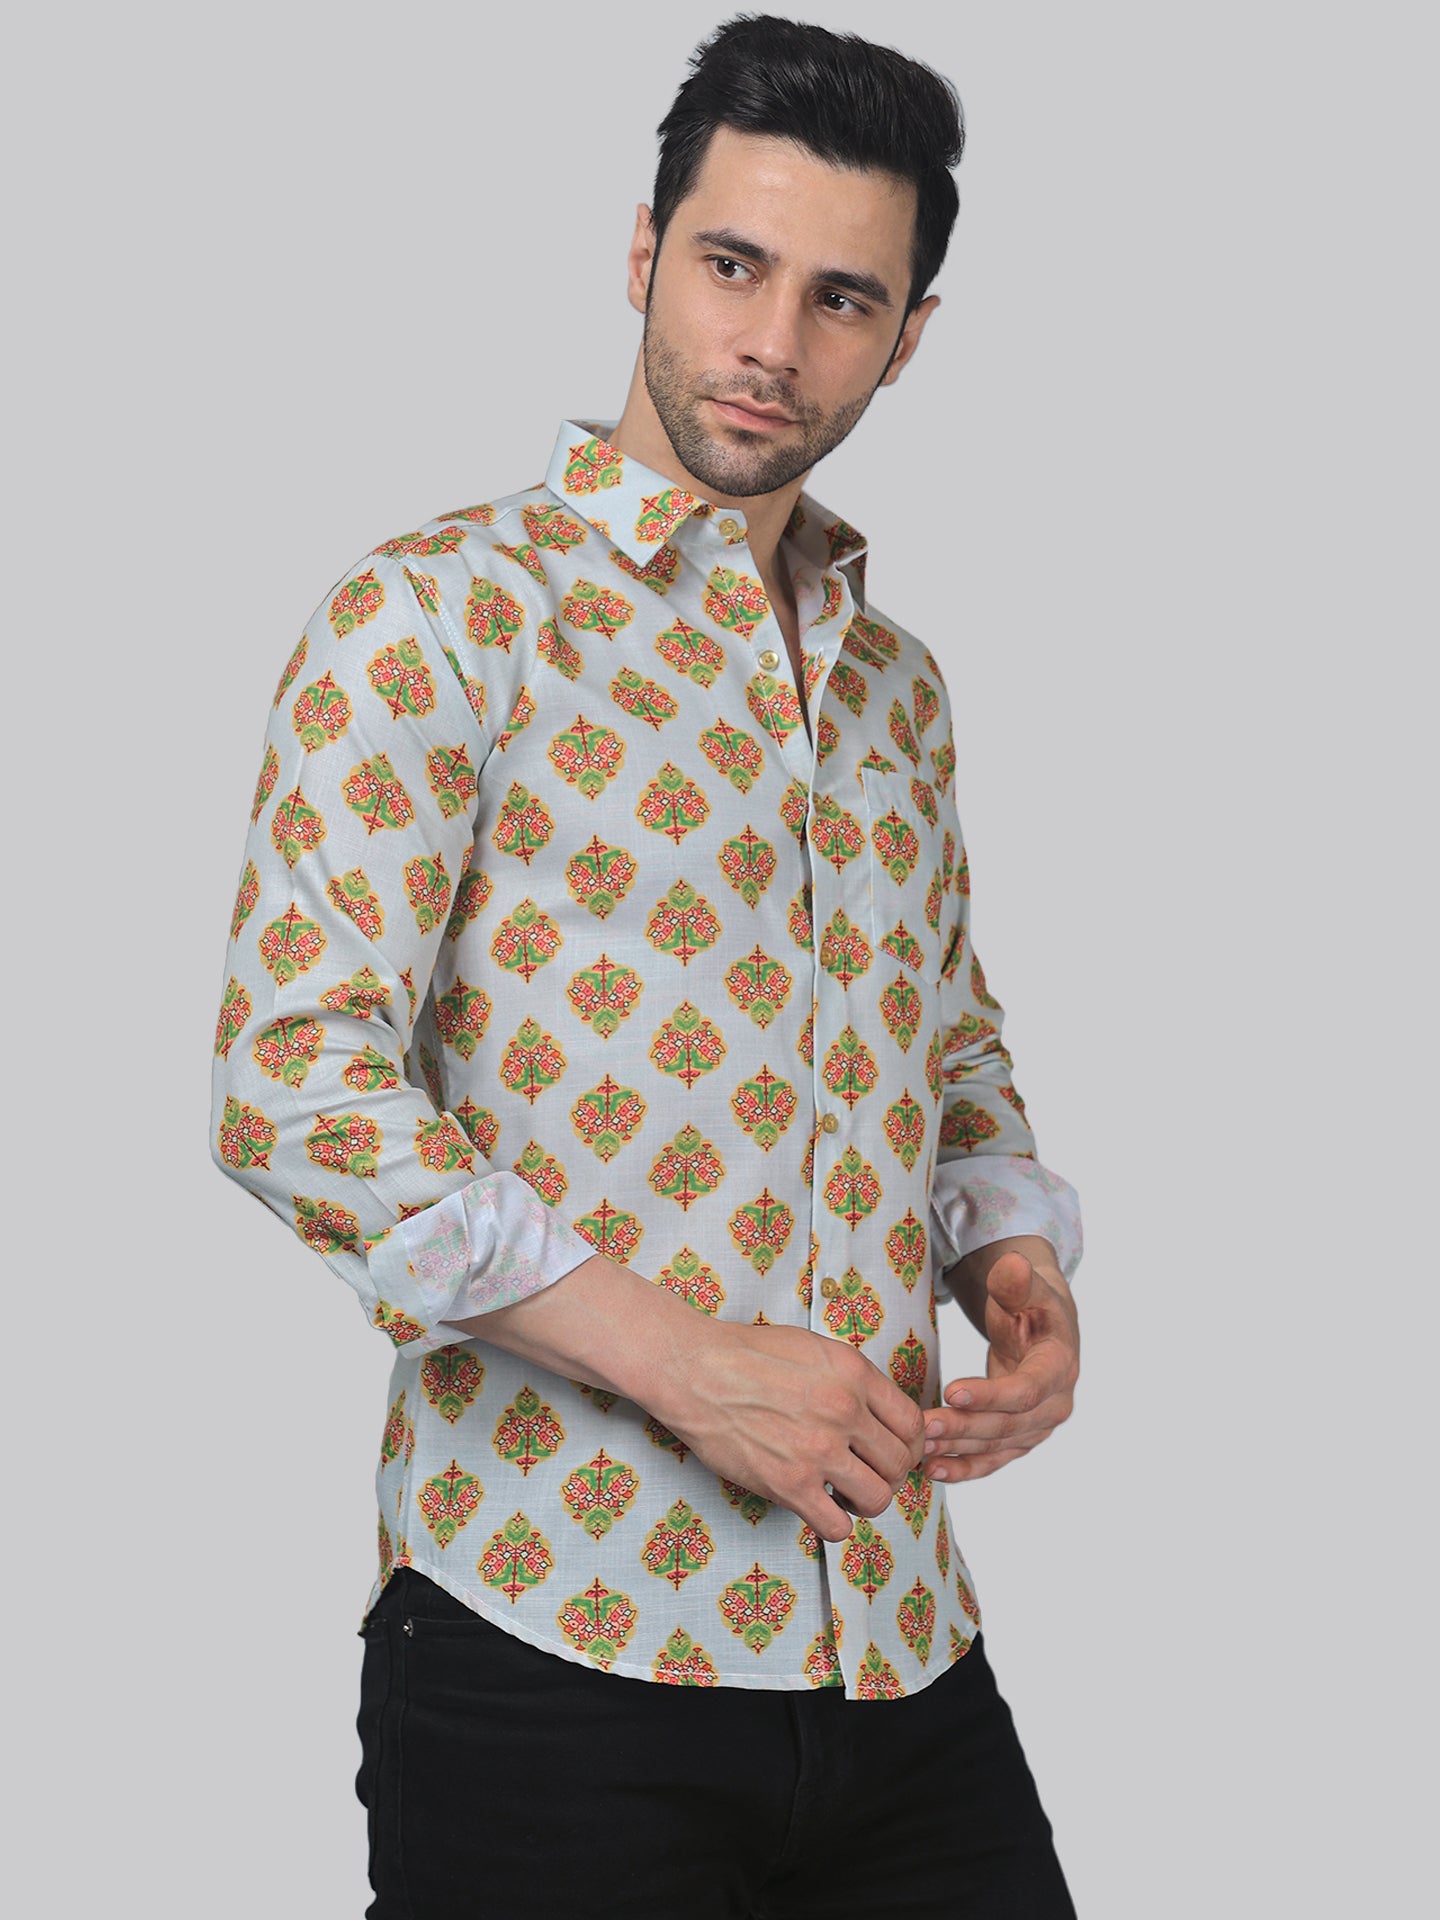 What are some key characteristics of poplin fabric shirts that make them suitable for formal occasions?